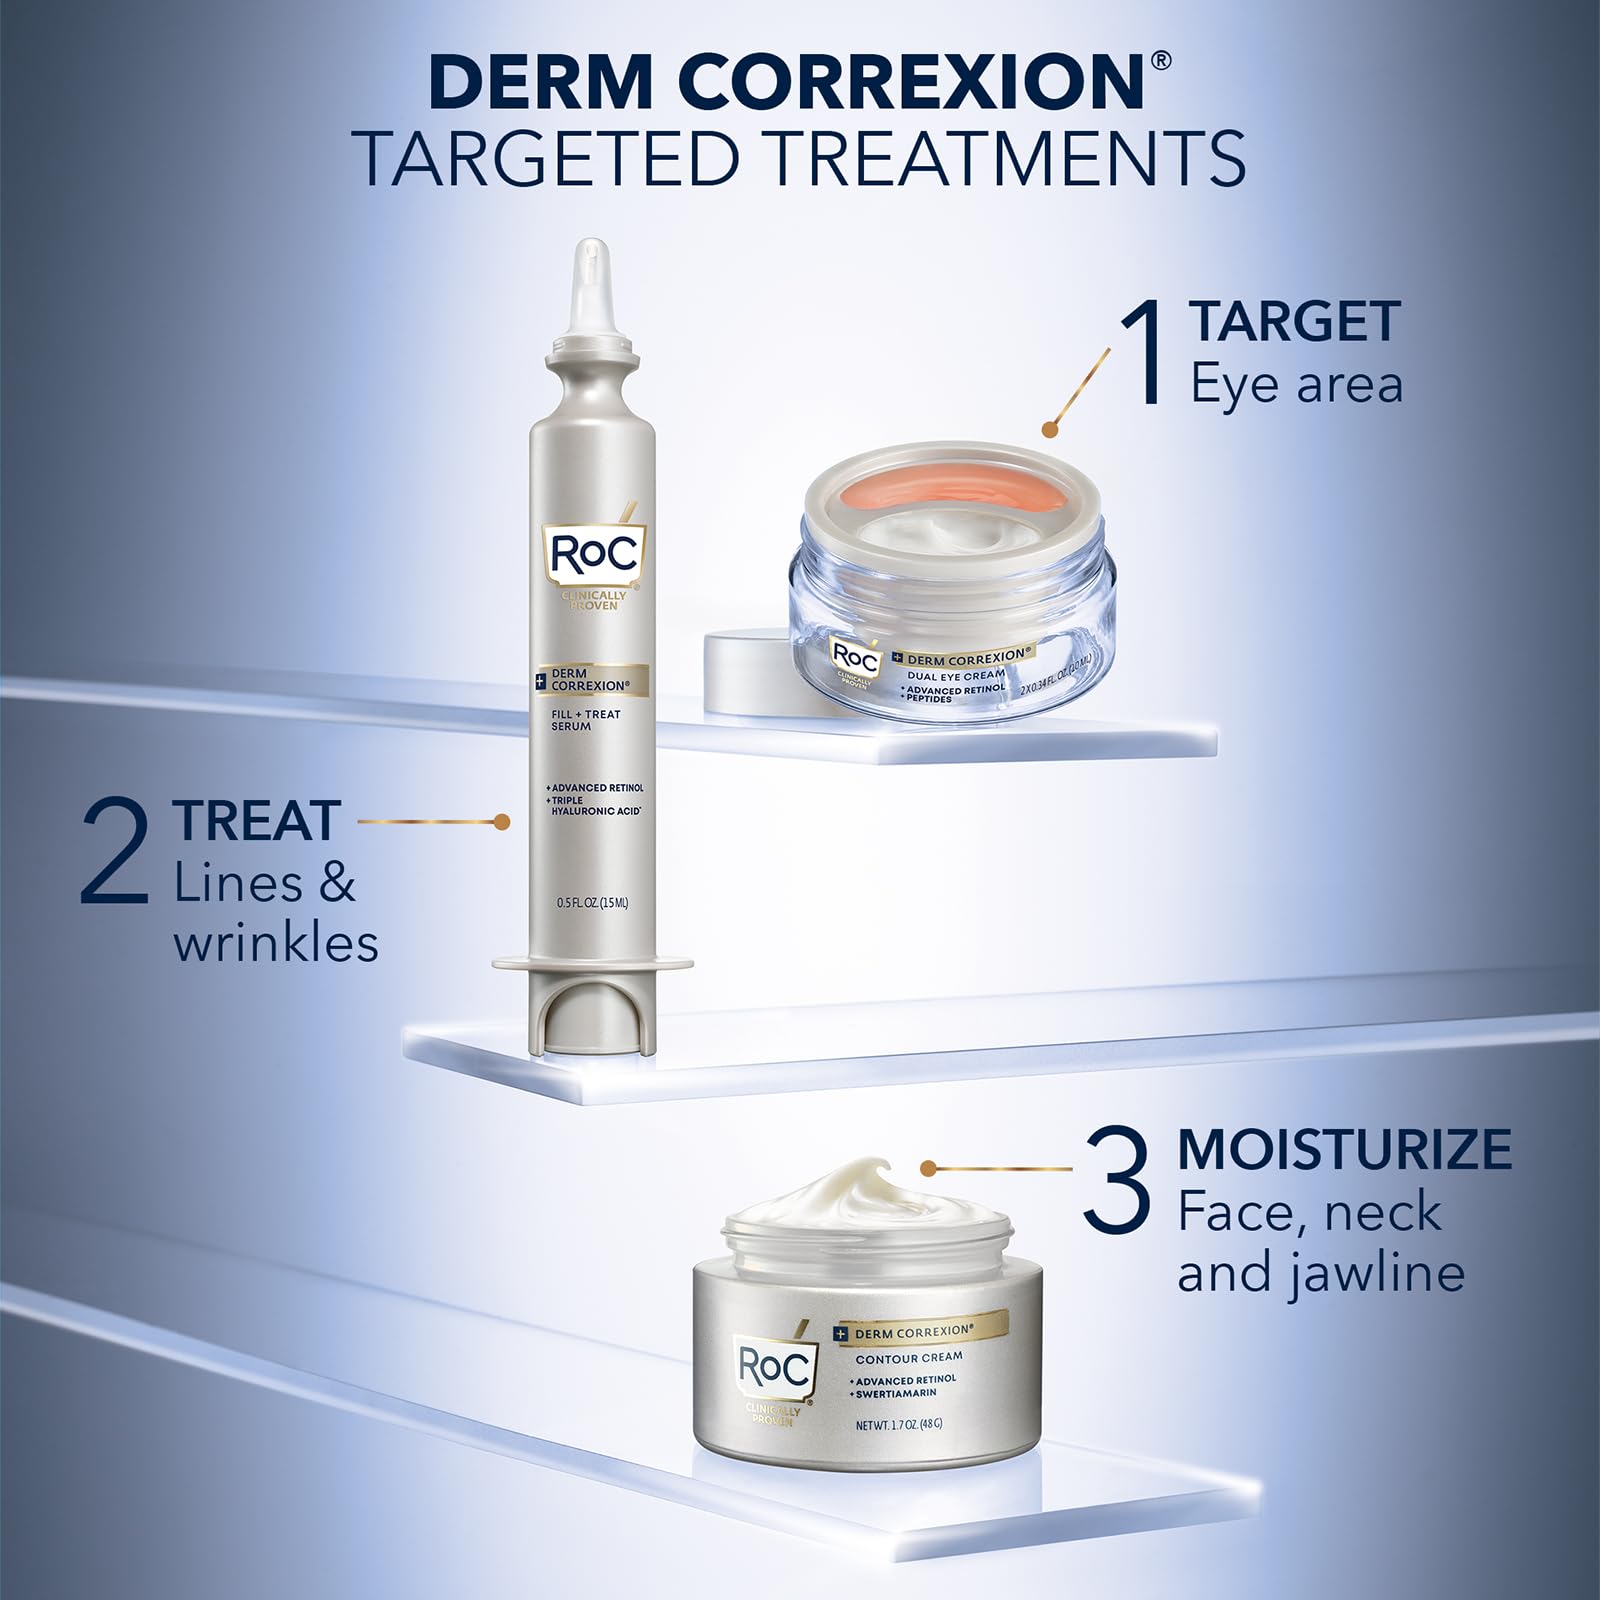 RoC DERM CORREXION DUAL EYE with Line Smoothing Eye Packette